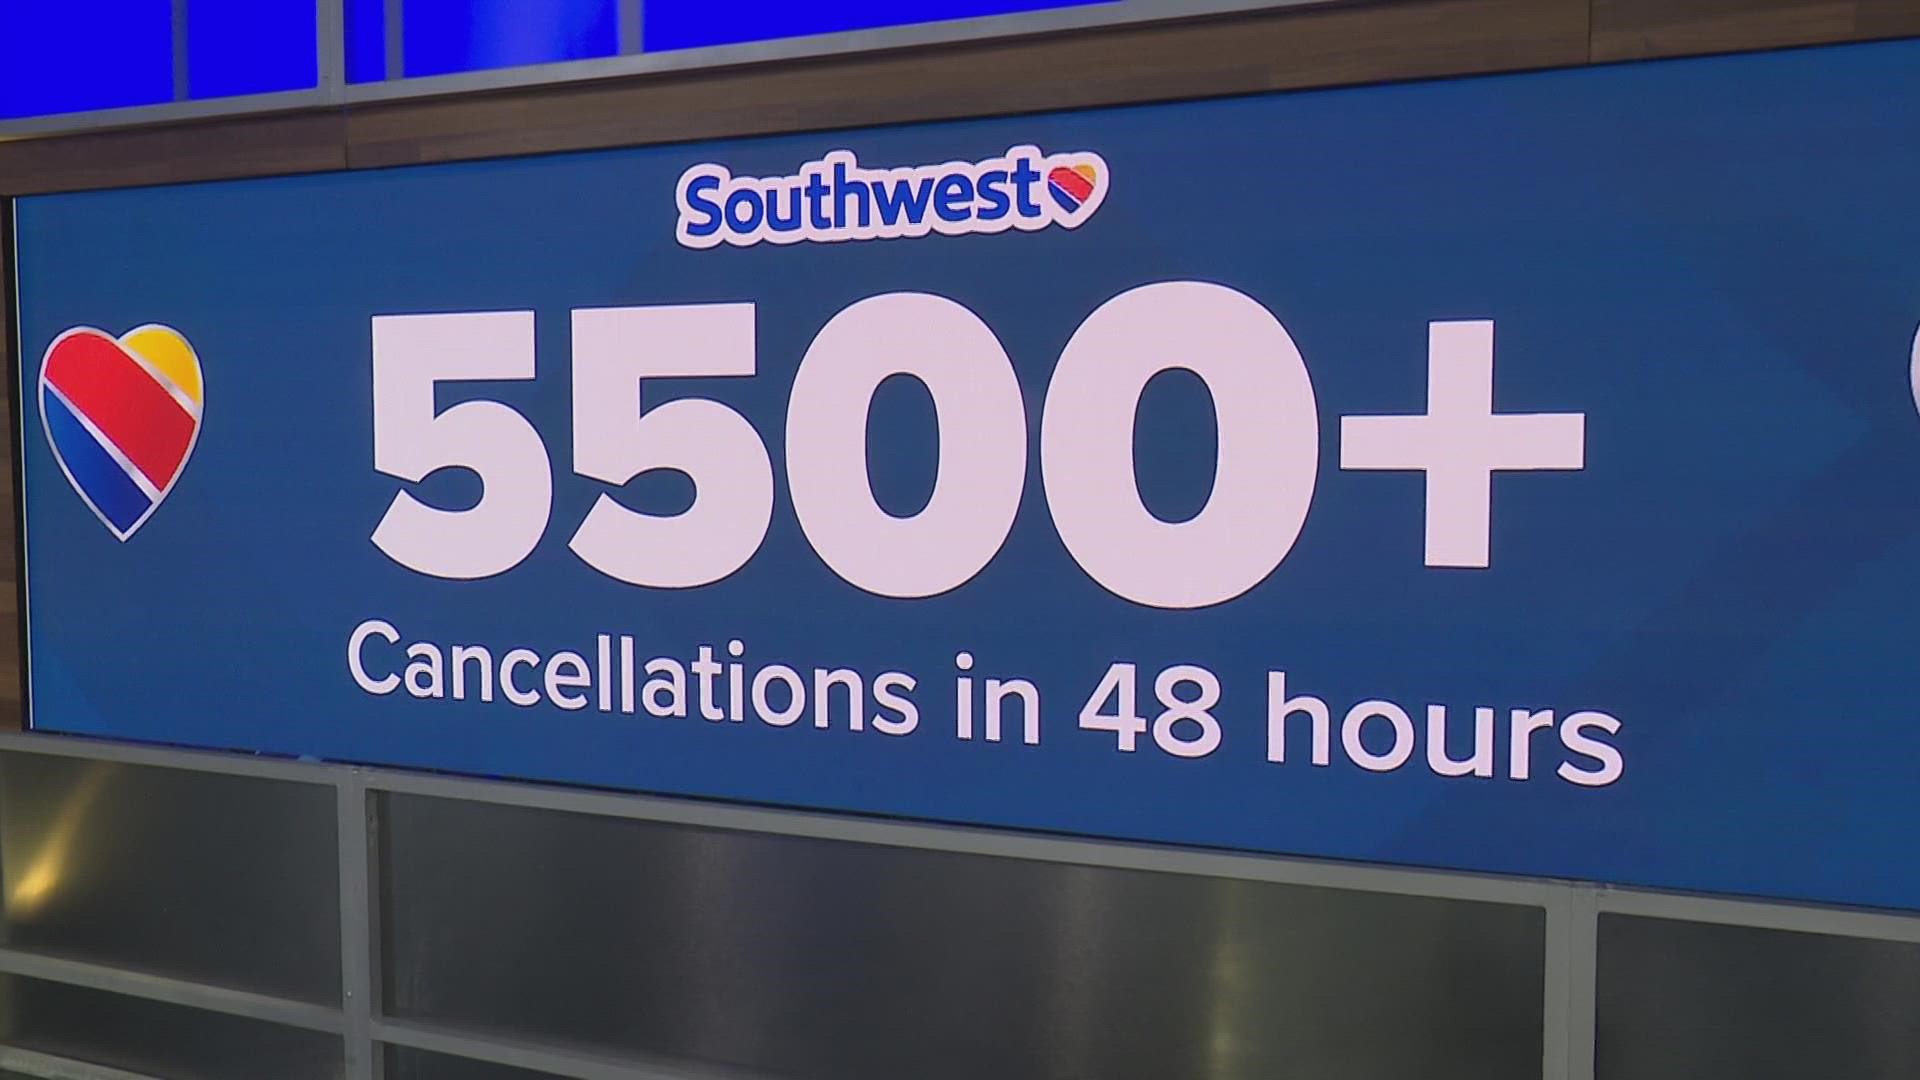 Over the last 48 hours, Southwest has canceled more than 5,500 flights, and many more cancellations are expected.